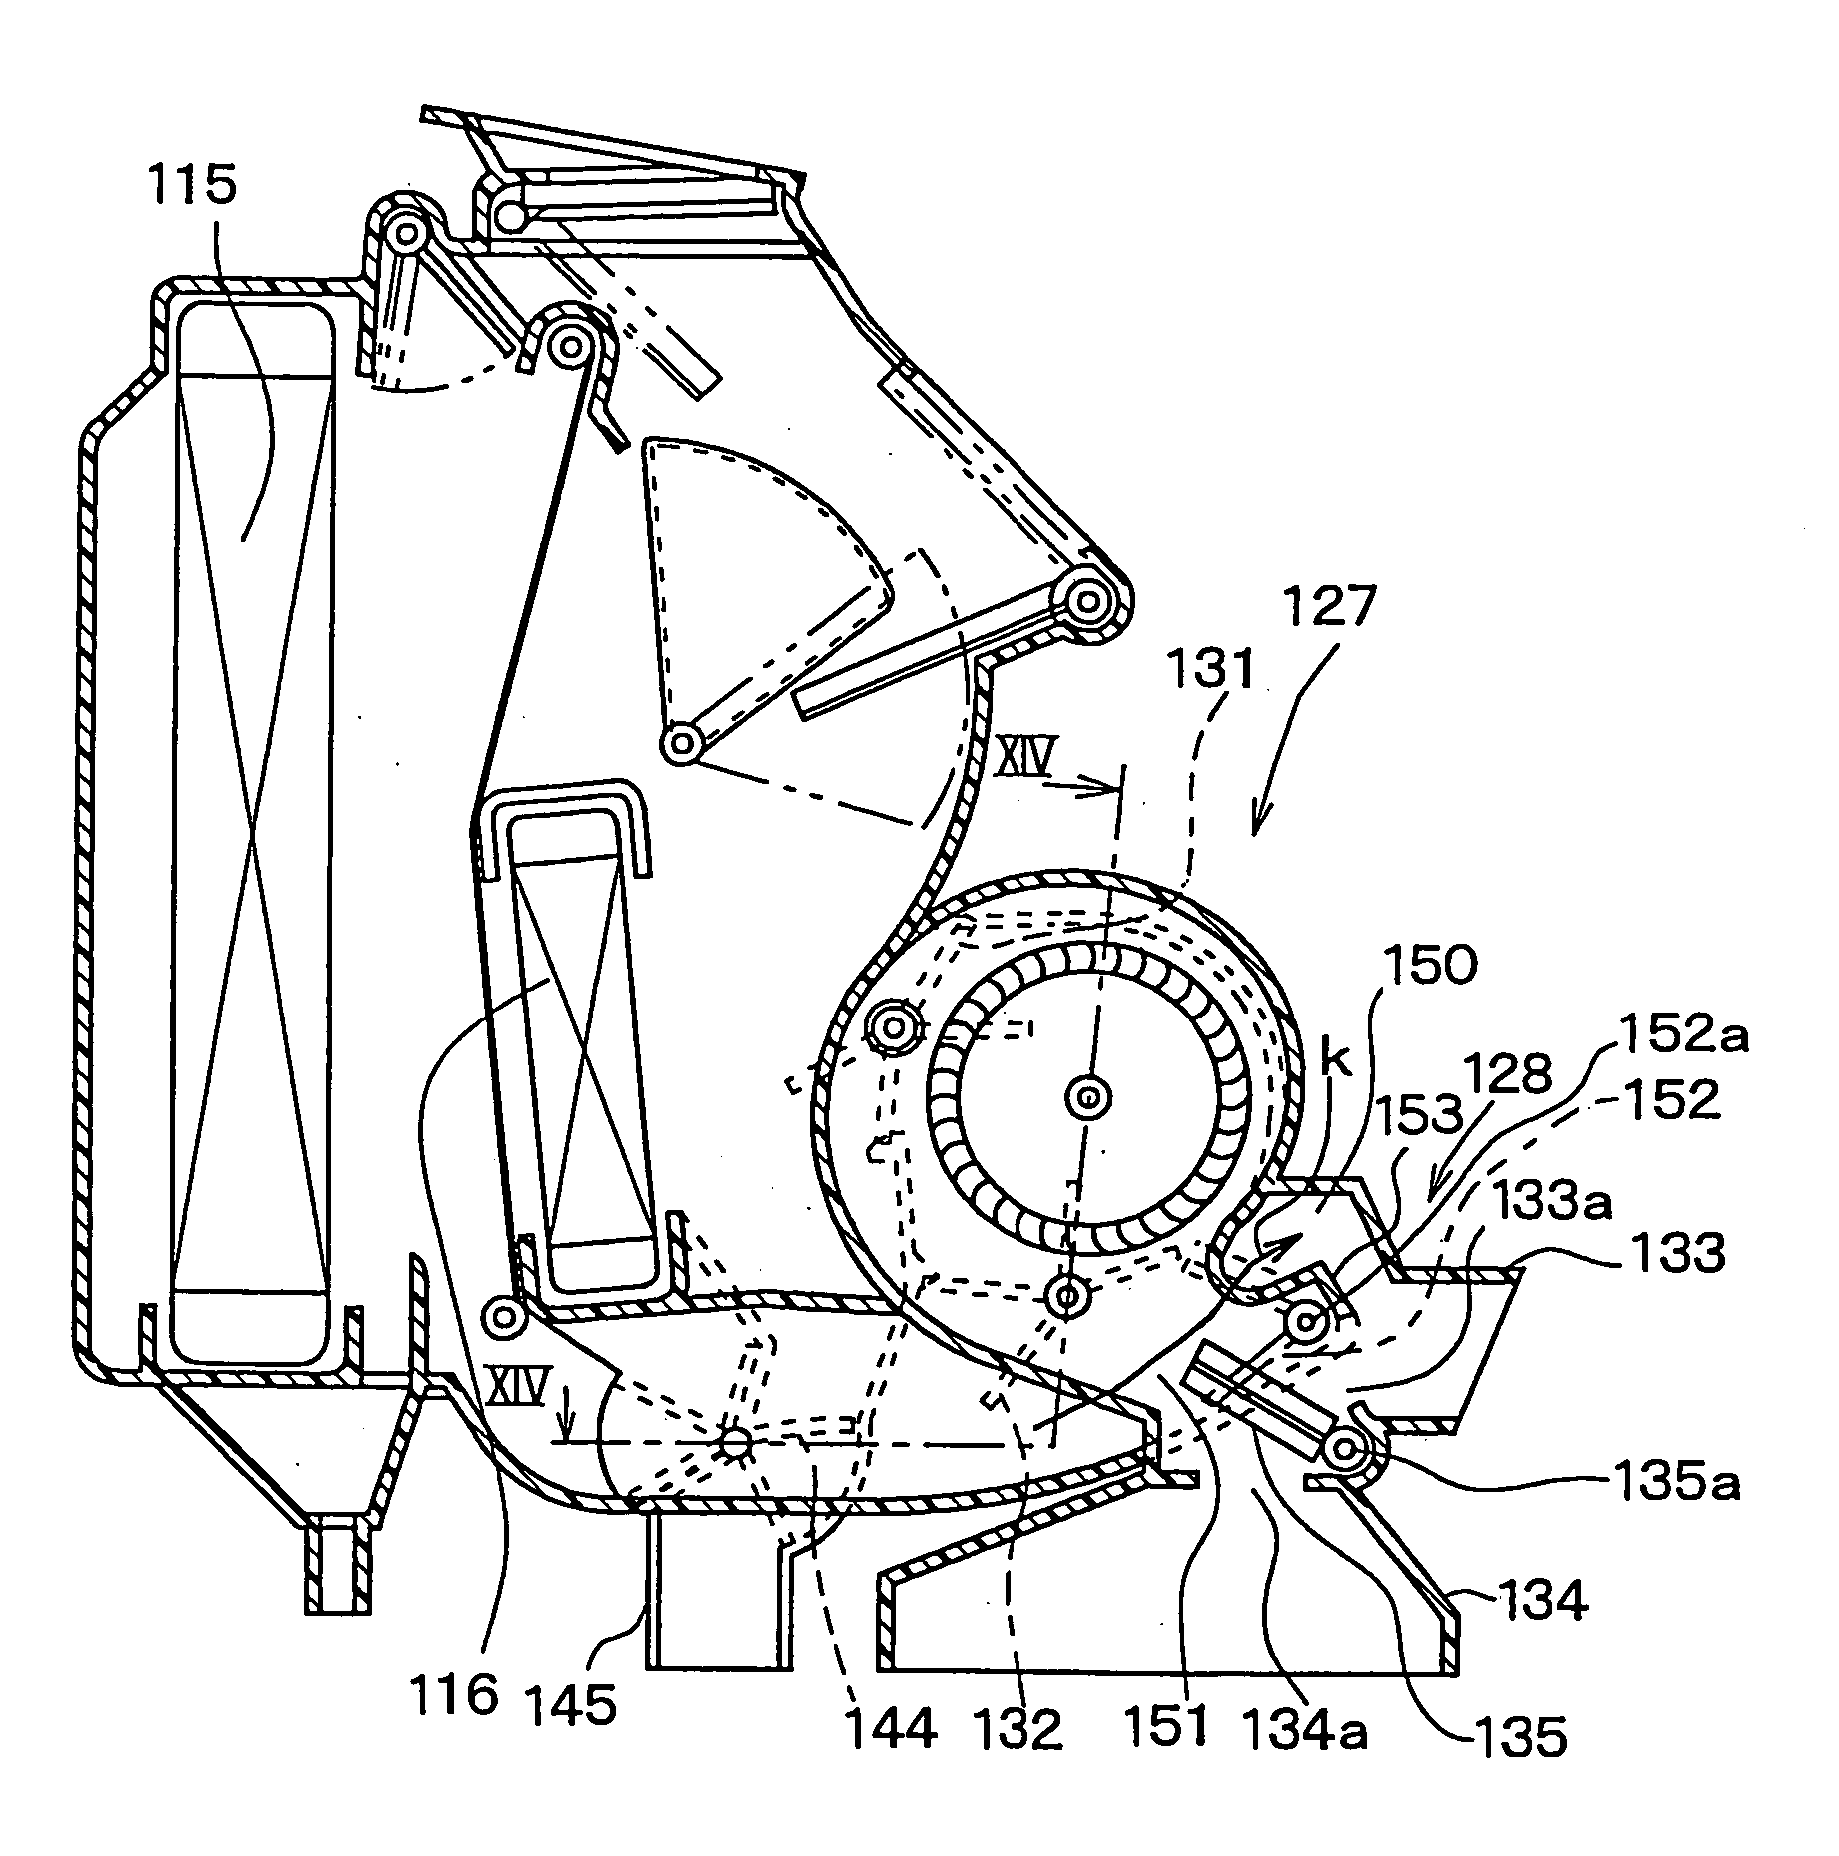 Vehicle air conditioner with main blower and sub-blower